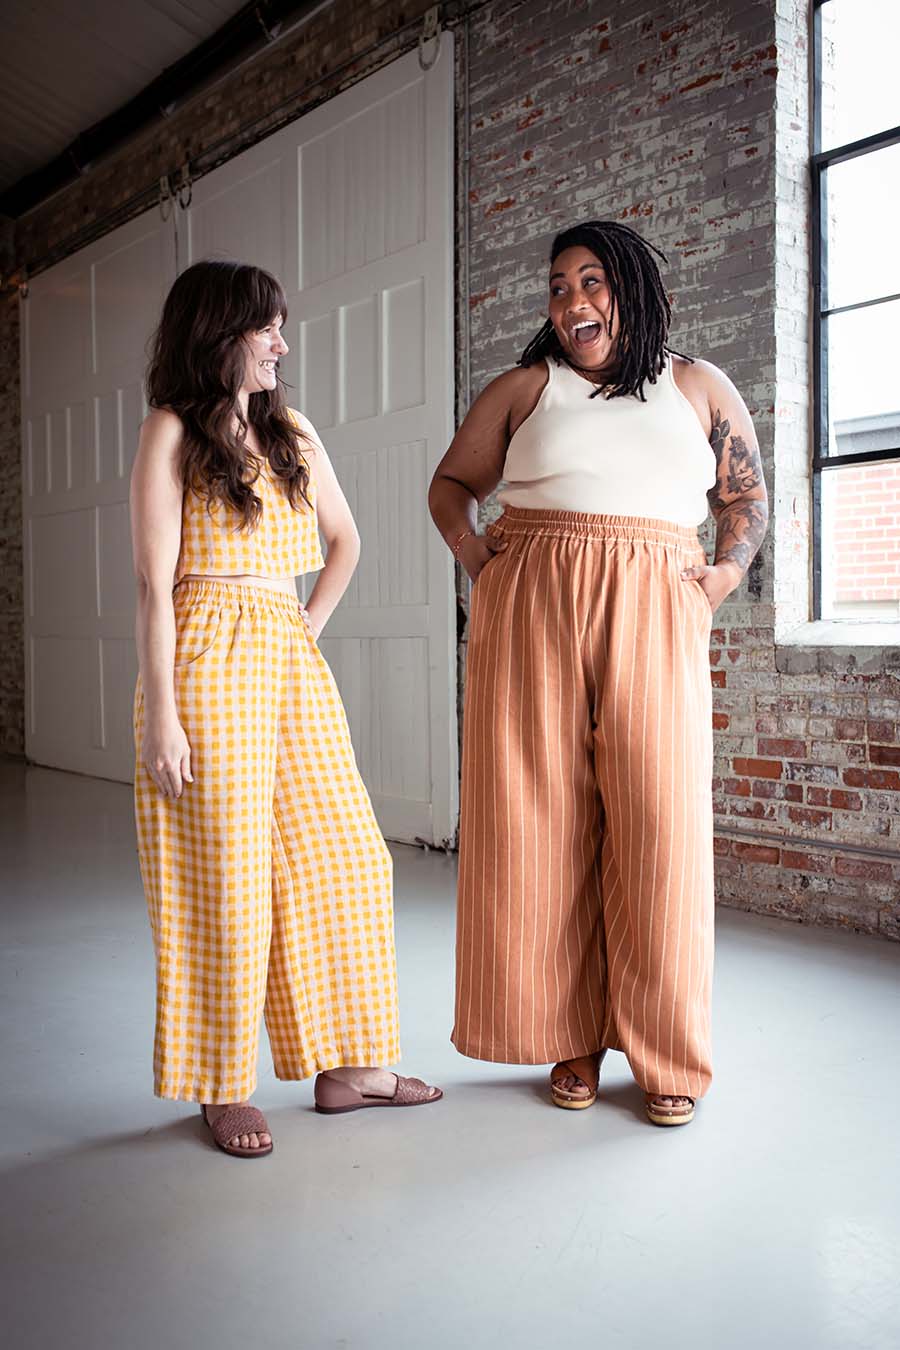 Ashley wearing striped view a chanterelle pants and a cream tank. Meredith wears pink and yellow checked matching separates. They smile and laugh together.